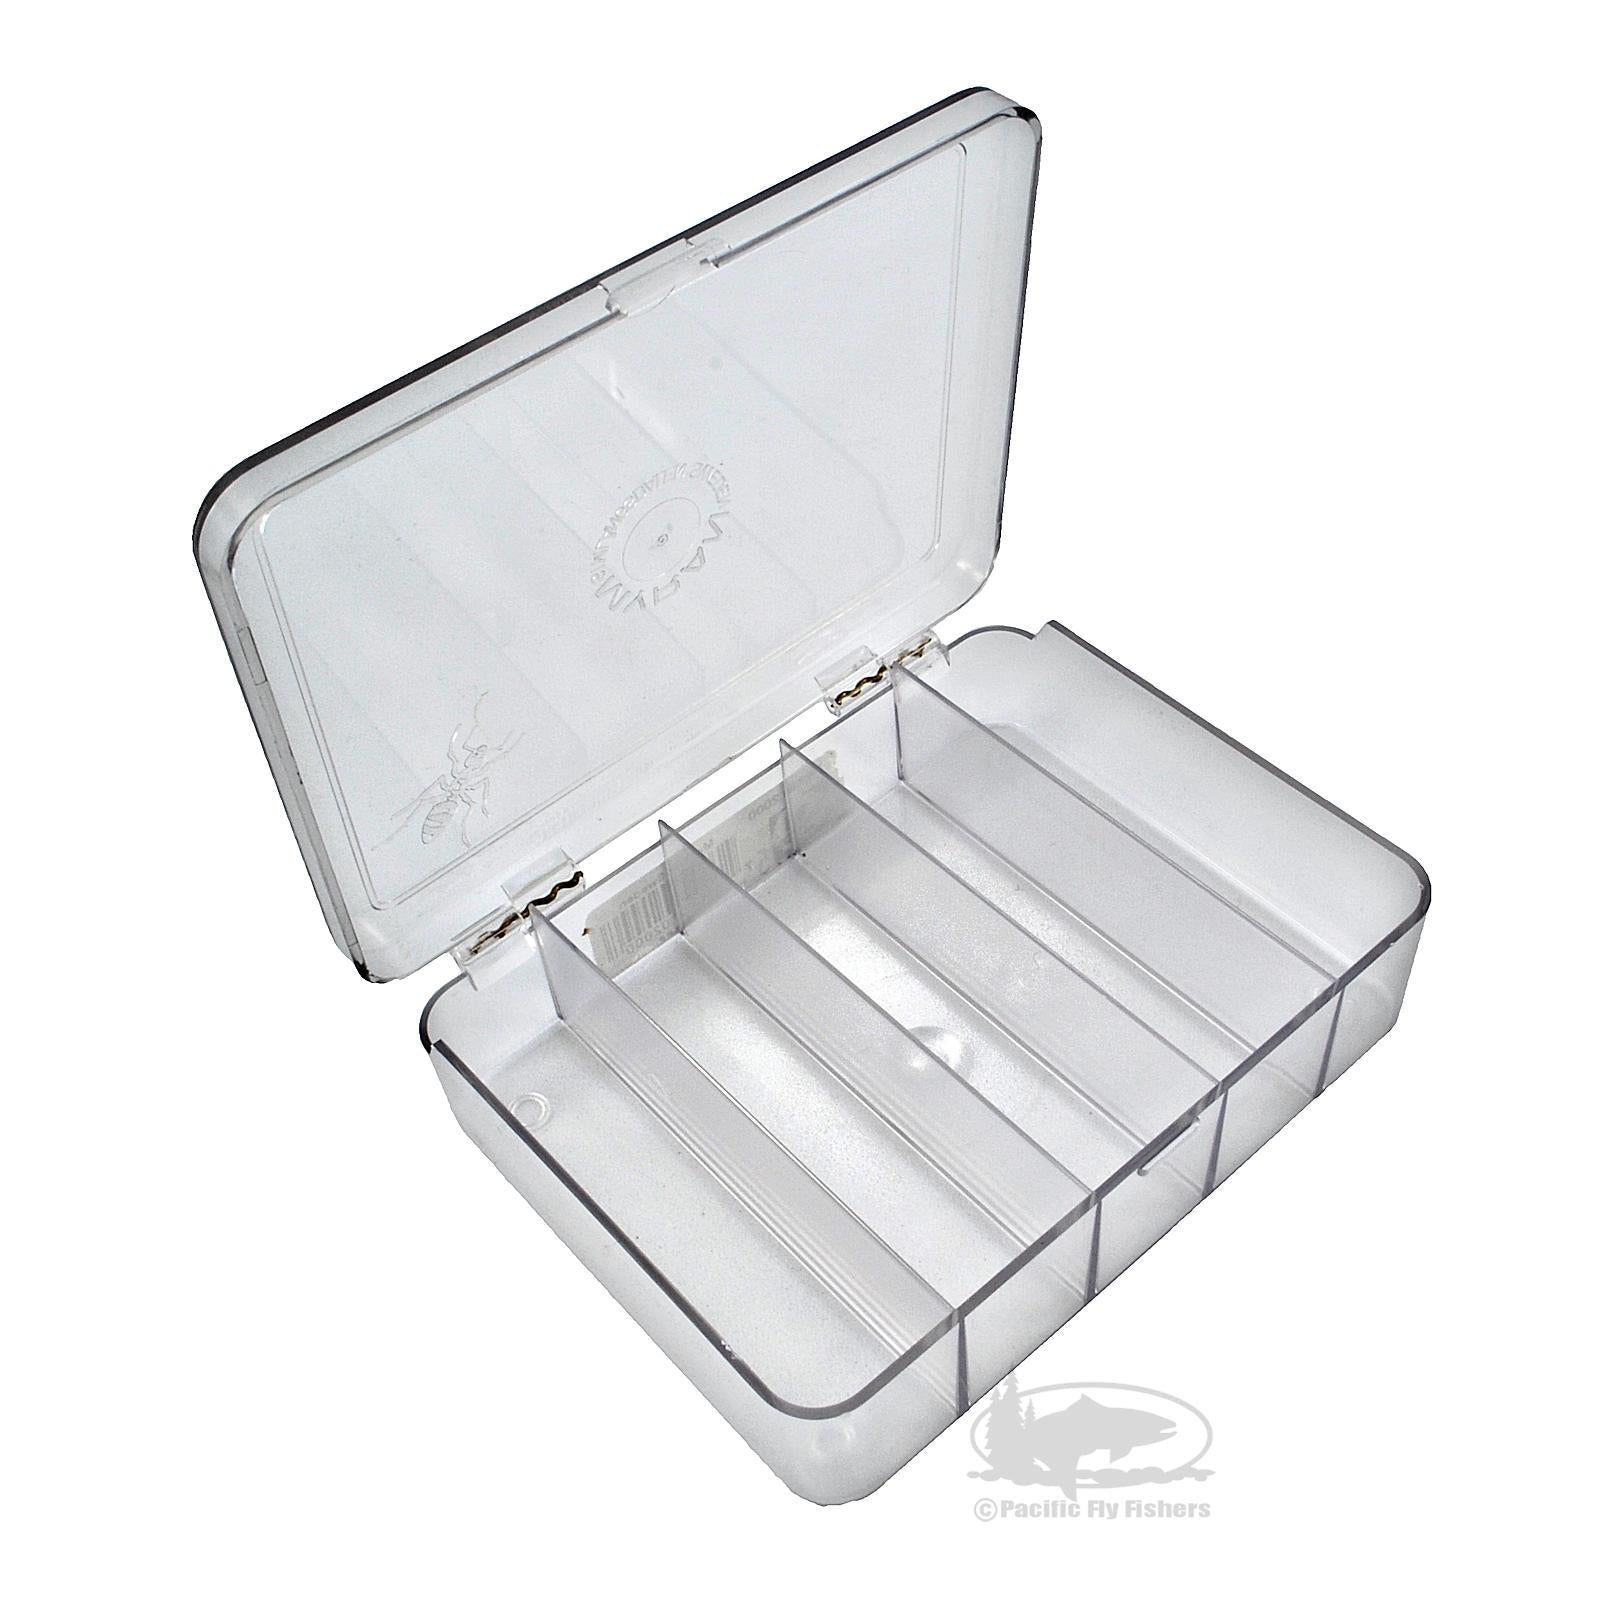 https://cdn.shopify.com/s/files/1/0211/7110/products/myran-compartment-fly-boxes_-_2000.jpg